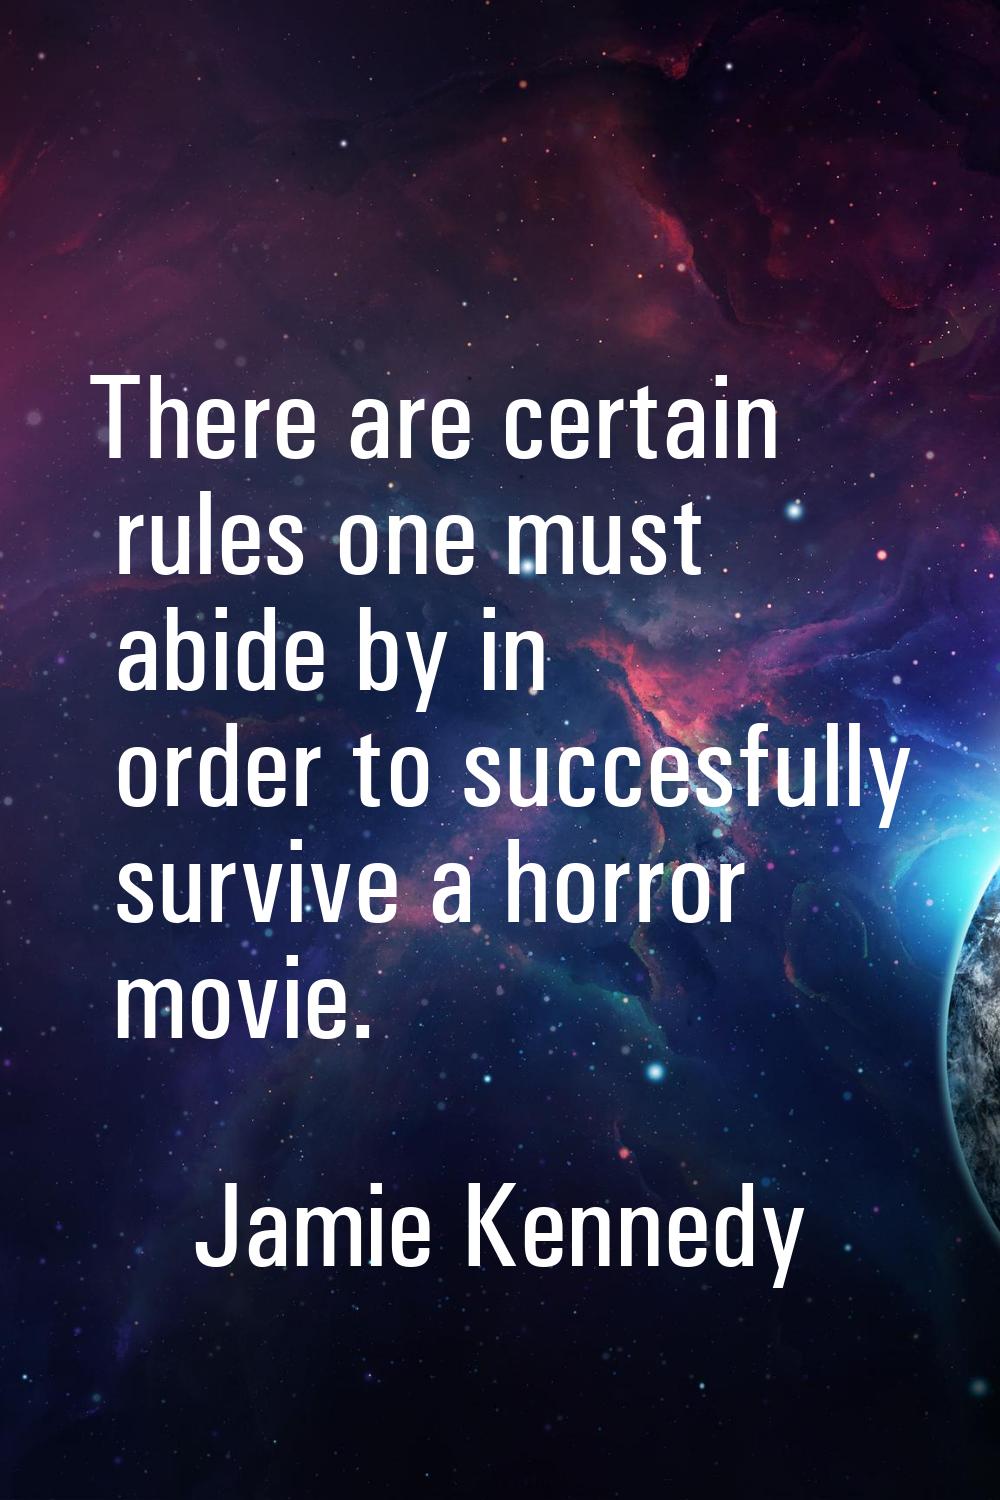 There are certain rules one must abide by in order to succesfully survive a horror movie.